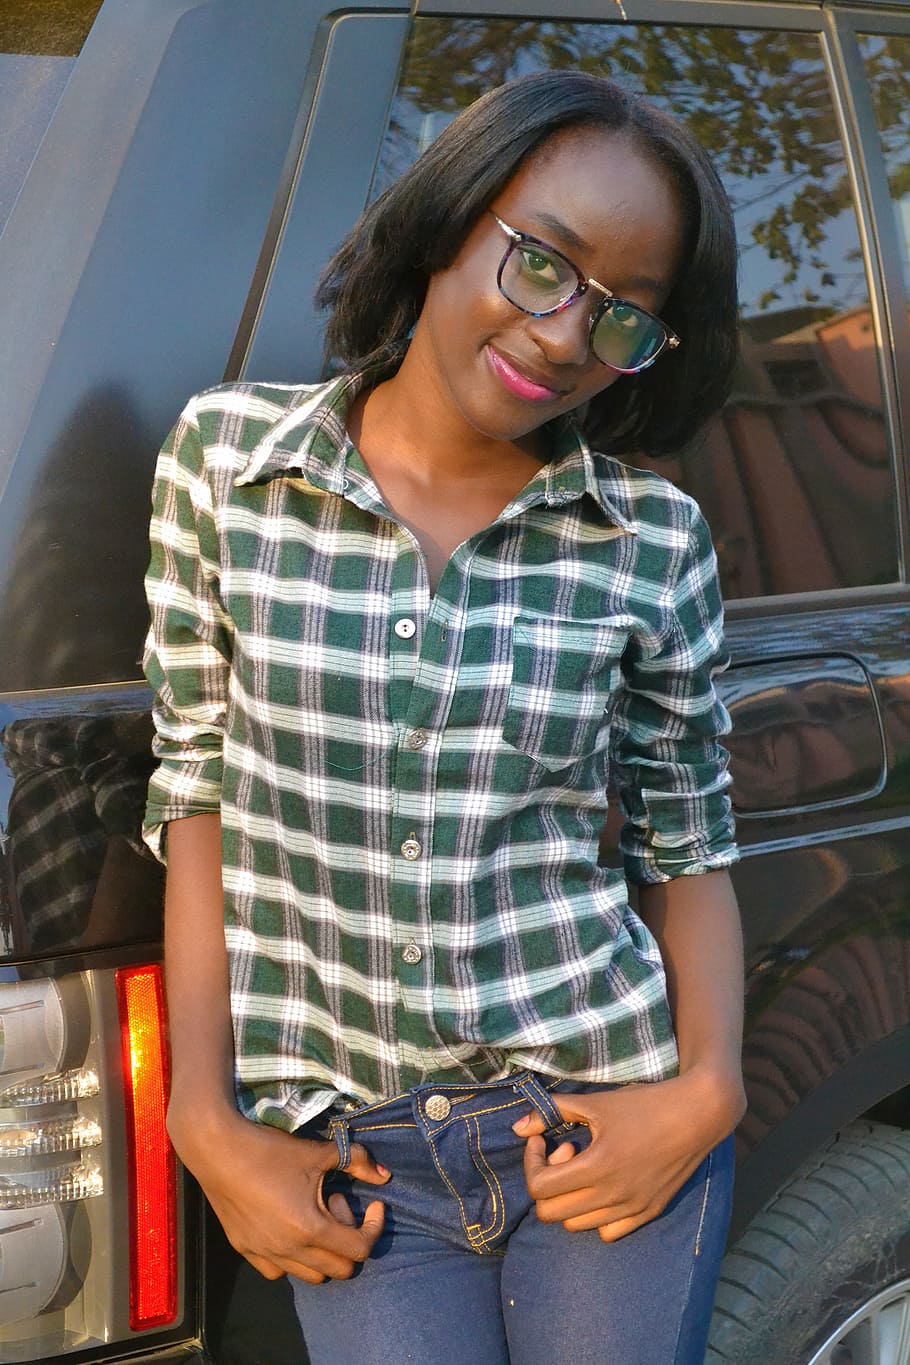 nair, angola, xeron design, smiley, girl, model, rosy lips, one person, glasses, mode of transportation